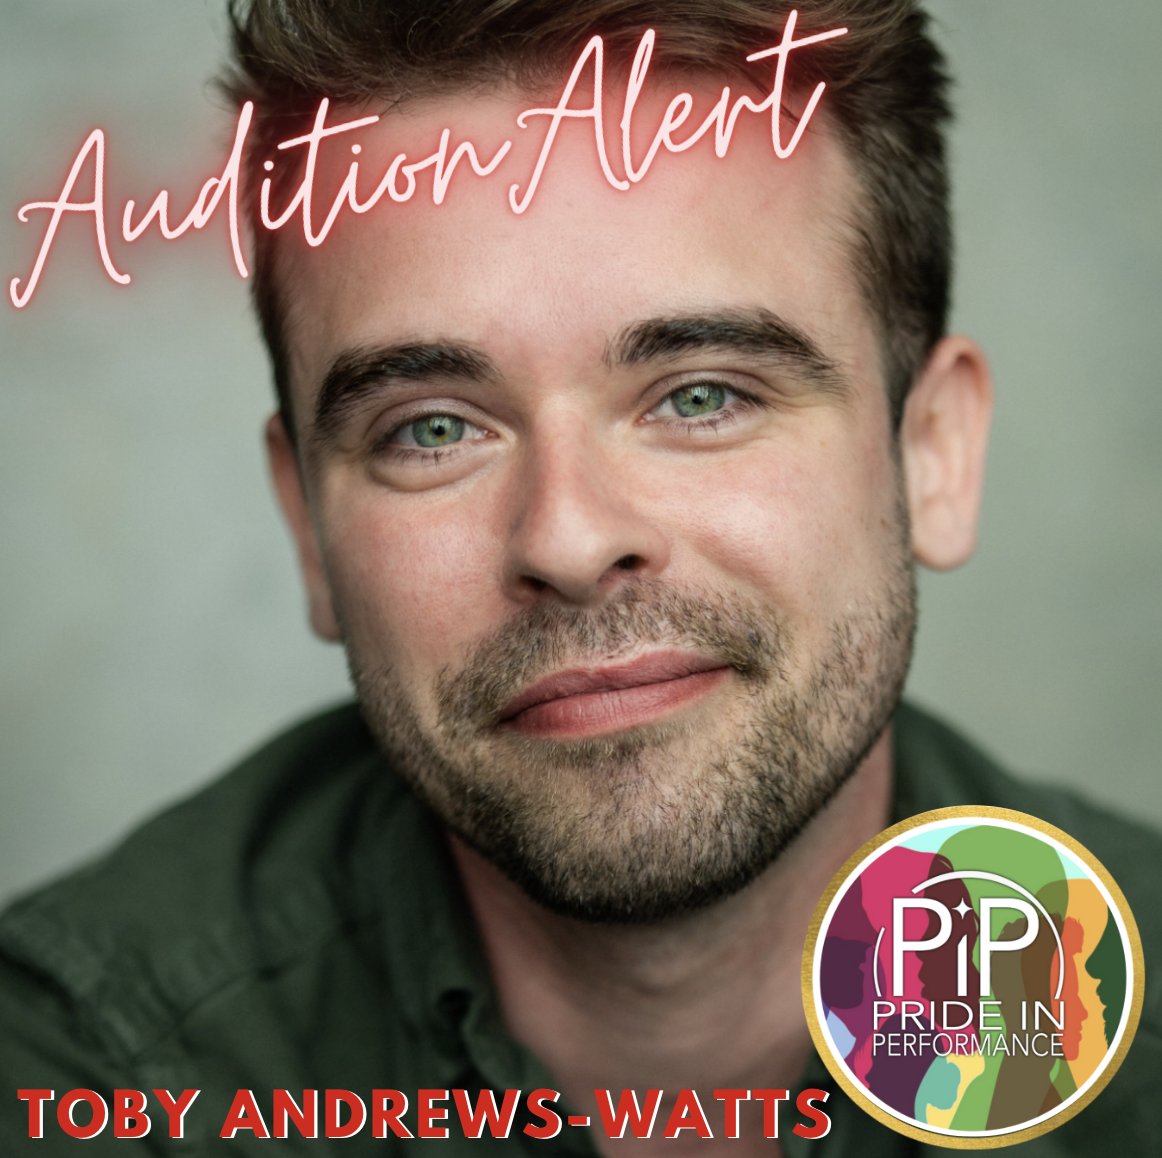 🚨 Audition Alert For TOBY ANDREWS-WATTS 🚨 @Toby_Watts enjoying a lovely #SelfTape #Casting for an #Photographic #Campaign spotlight.com/1018-3498-4967 #PositivelyPiP #AuditionAlert #ActorsLife